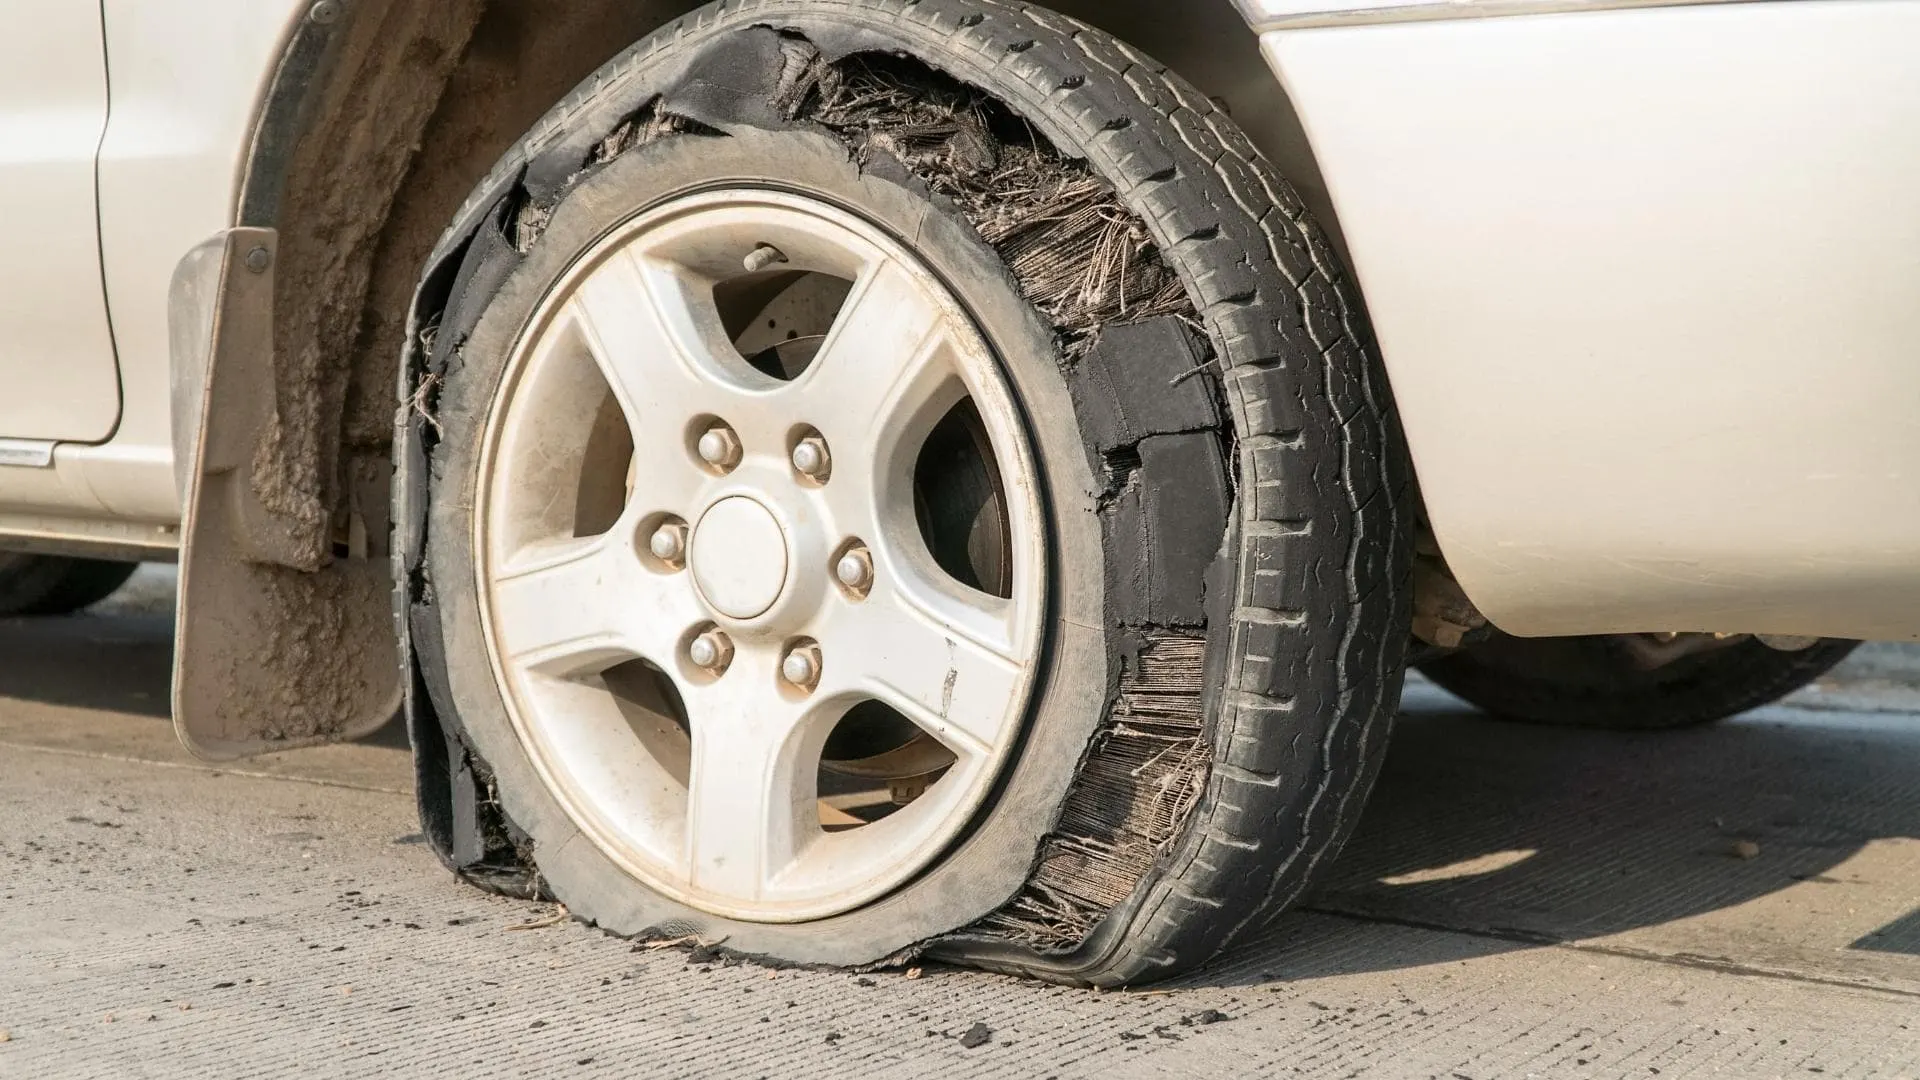 Incorrect rv tire pressure can cause a blowout, as shown in this photos of a damaged tire.